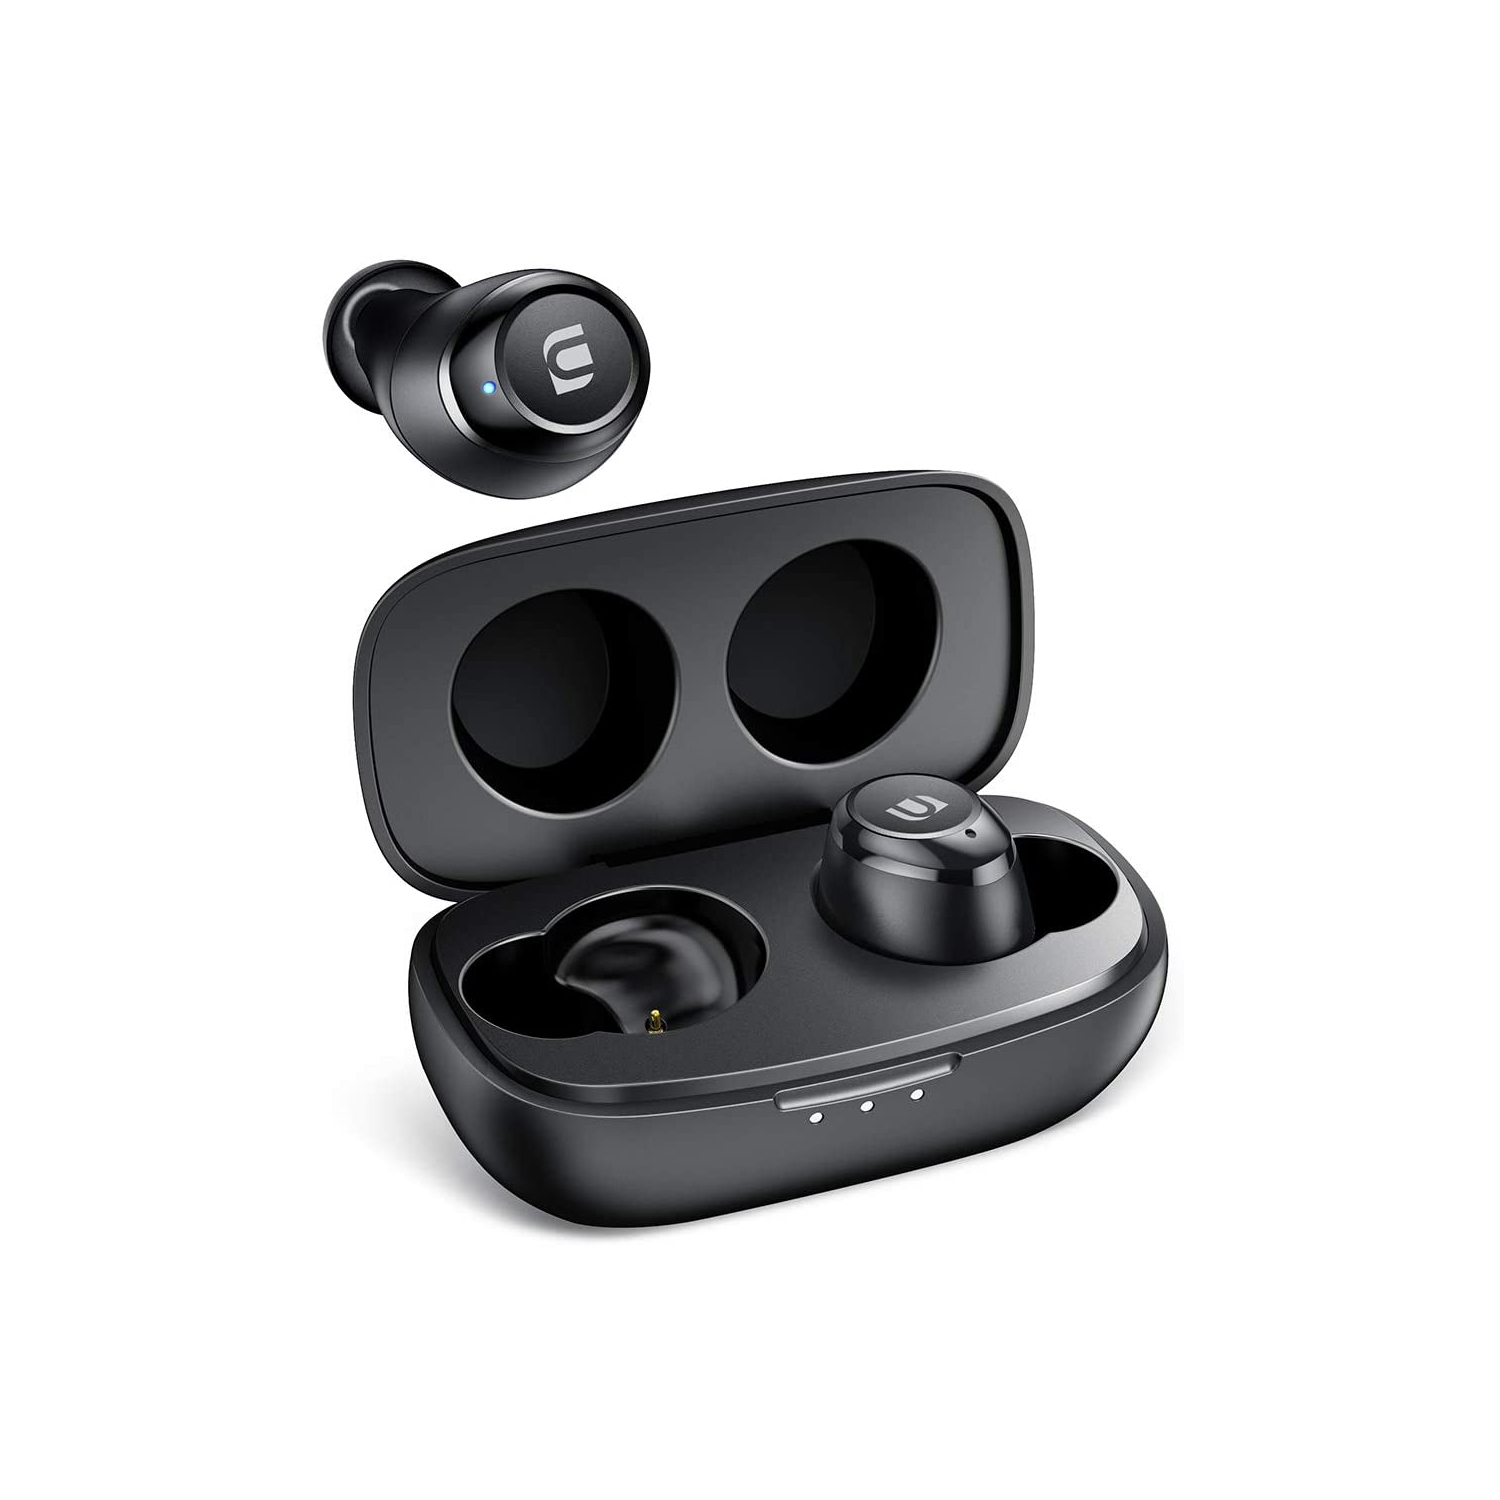 UGREEN HiTune Wireless Earbuds Bluetooth 5.0 Headphones In-Ear Stereo HiFi Sound Waterproof Sports Earphones with USB C Charging Case 27H Playtime, Built-in Mic CVC 8.0 Noise Cancelling, Touch Control